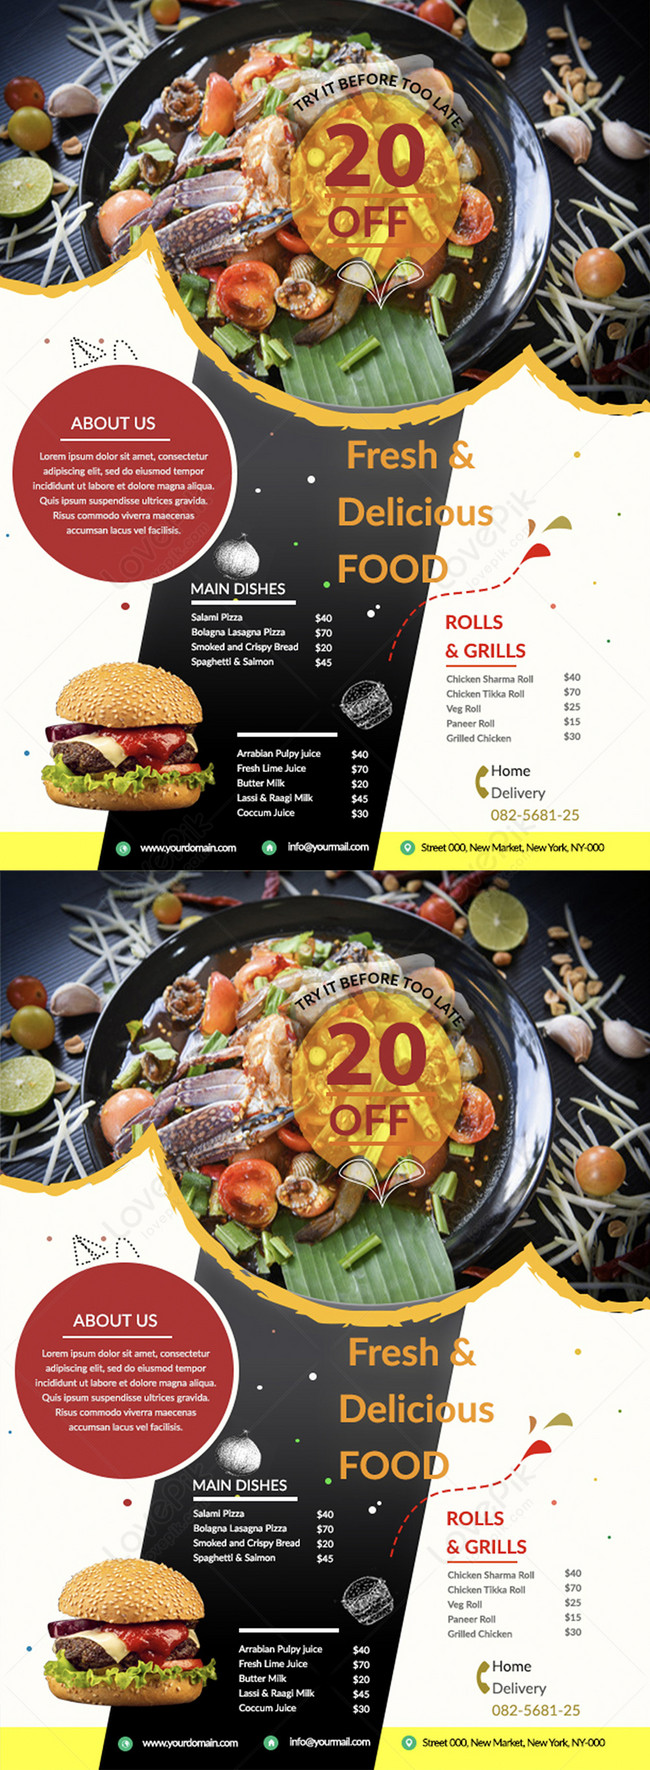 Fresh Fast Food Sale Flyer Template Image Picture Free Download 450013028 Lovepik Com